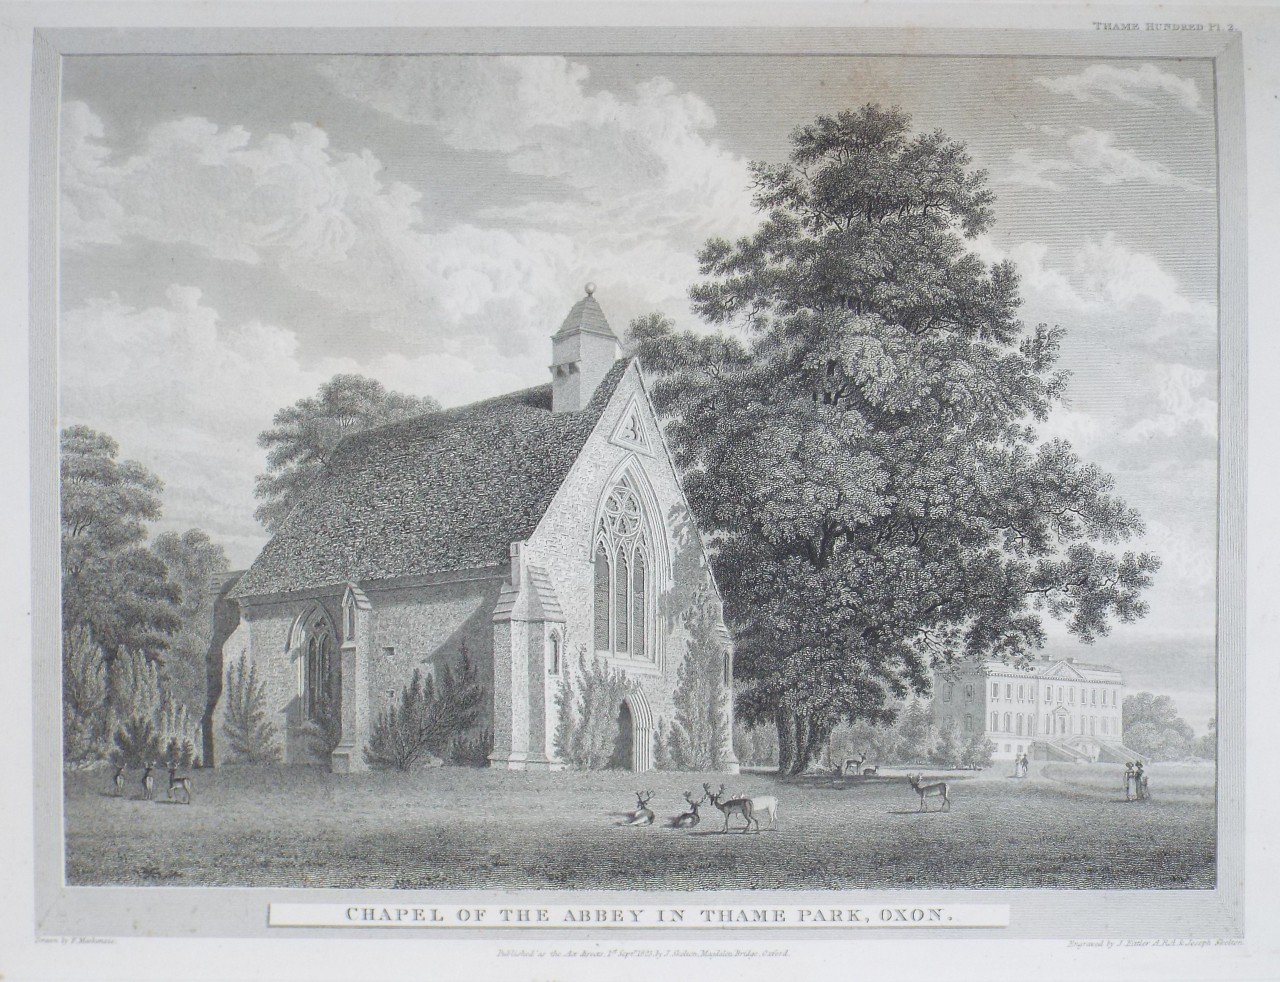 Print - Chapel of the Abbey in Thame Park, Oxon. - Skelton